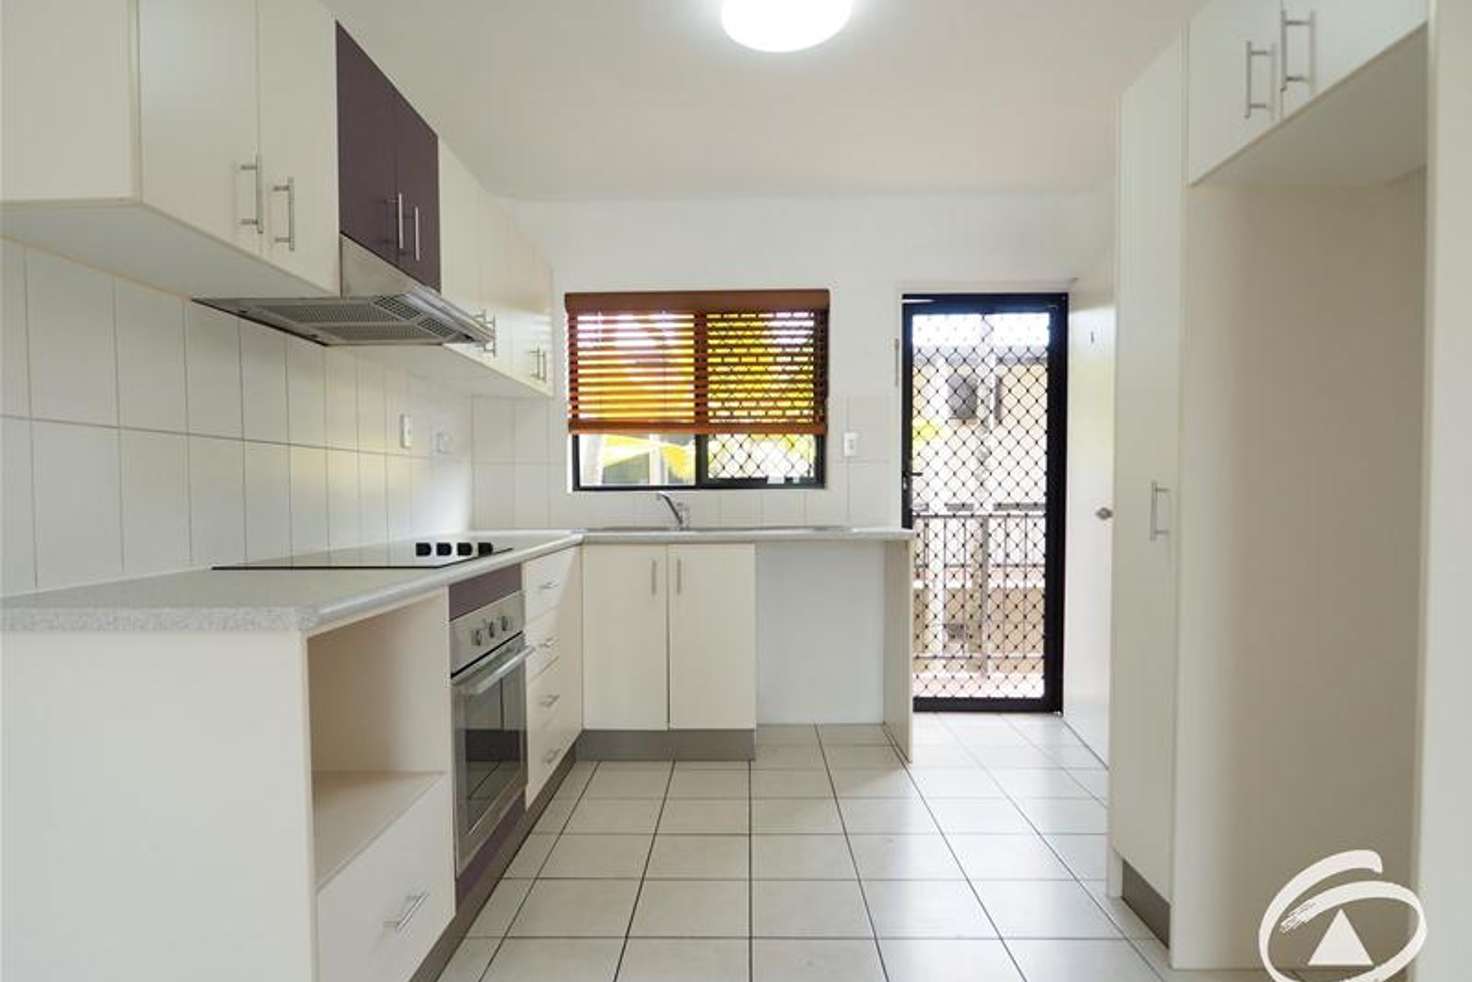 Main view of Homely apartment listing, 6/195 Sheridan Street, Cairns North QLD 4870